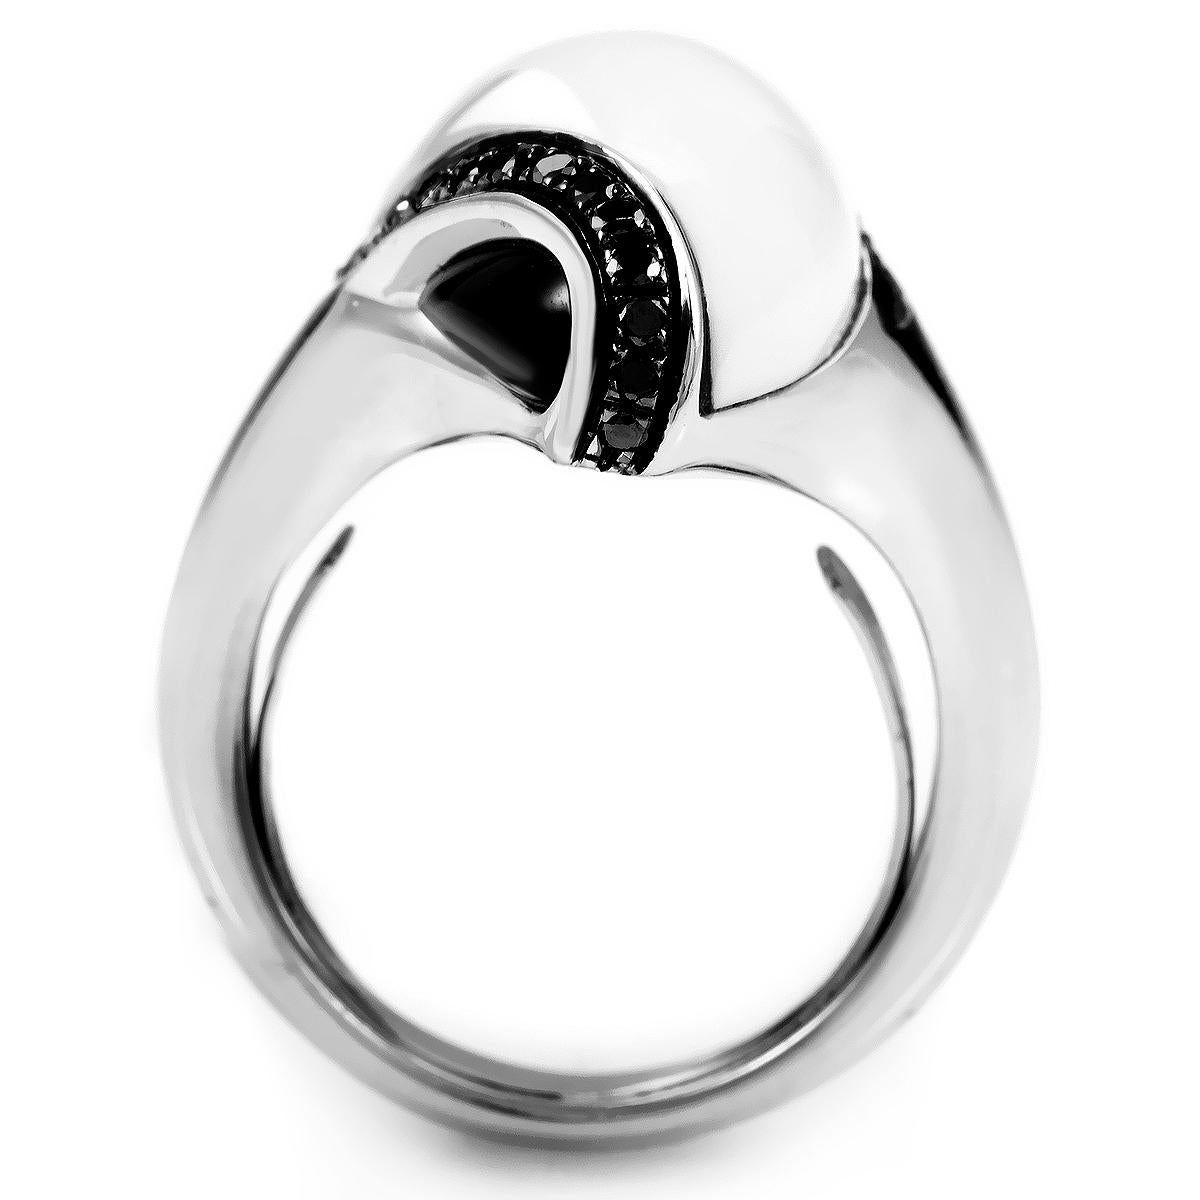 A brilliant, futuristic design that is bound to astonish and dazzle every single time, with the impressive, curvy 18K white gold body twisting its way up to the stunning white agate stone contrasted beautifully by the delicate black diamonds